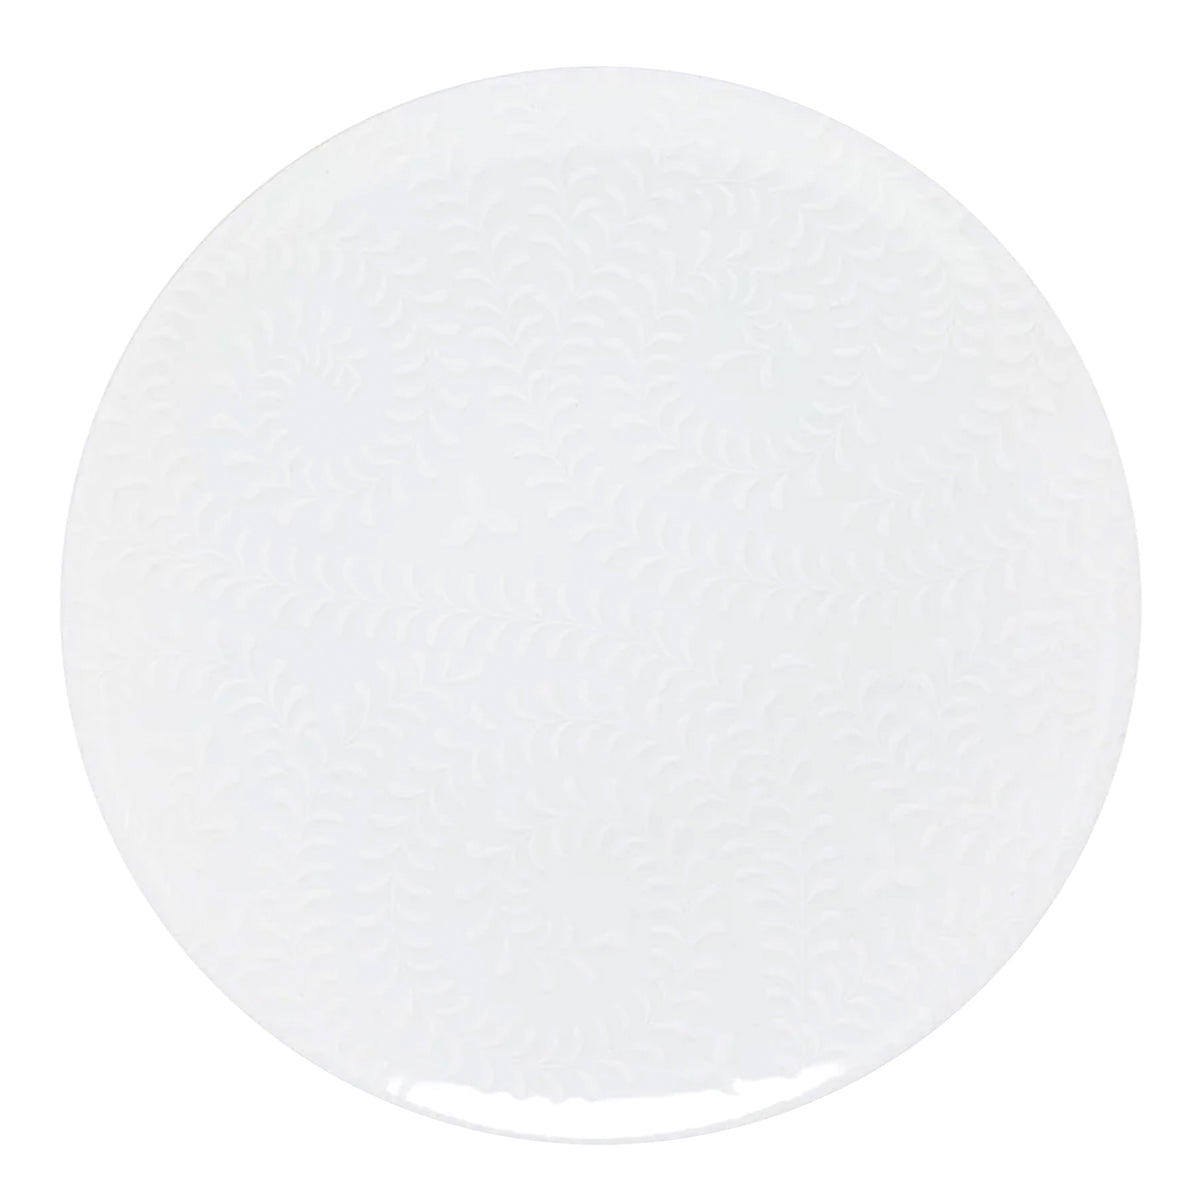 ARJUNA white on white - Charger plate